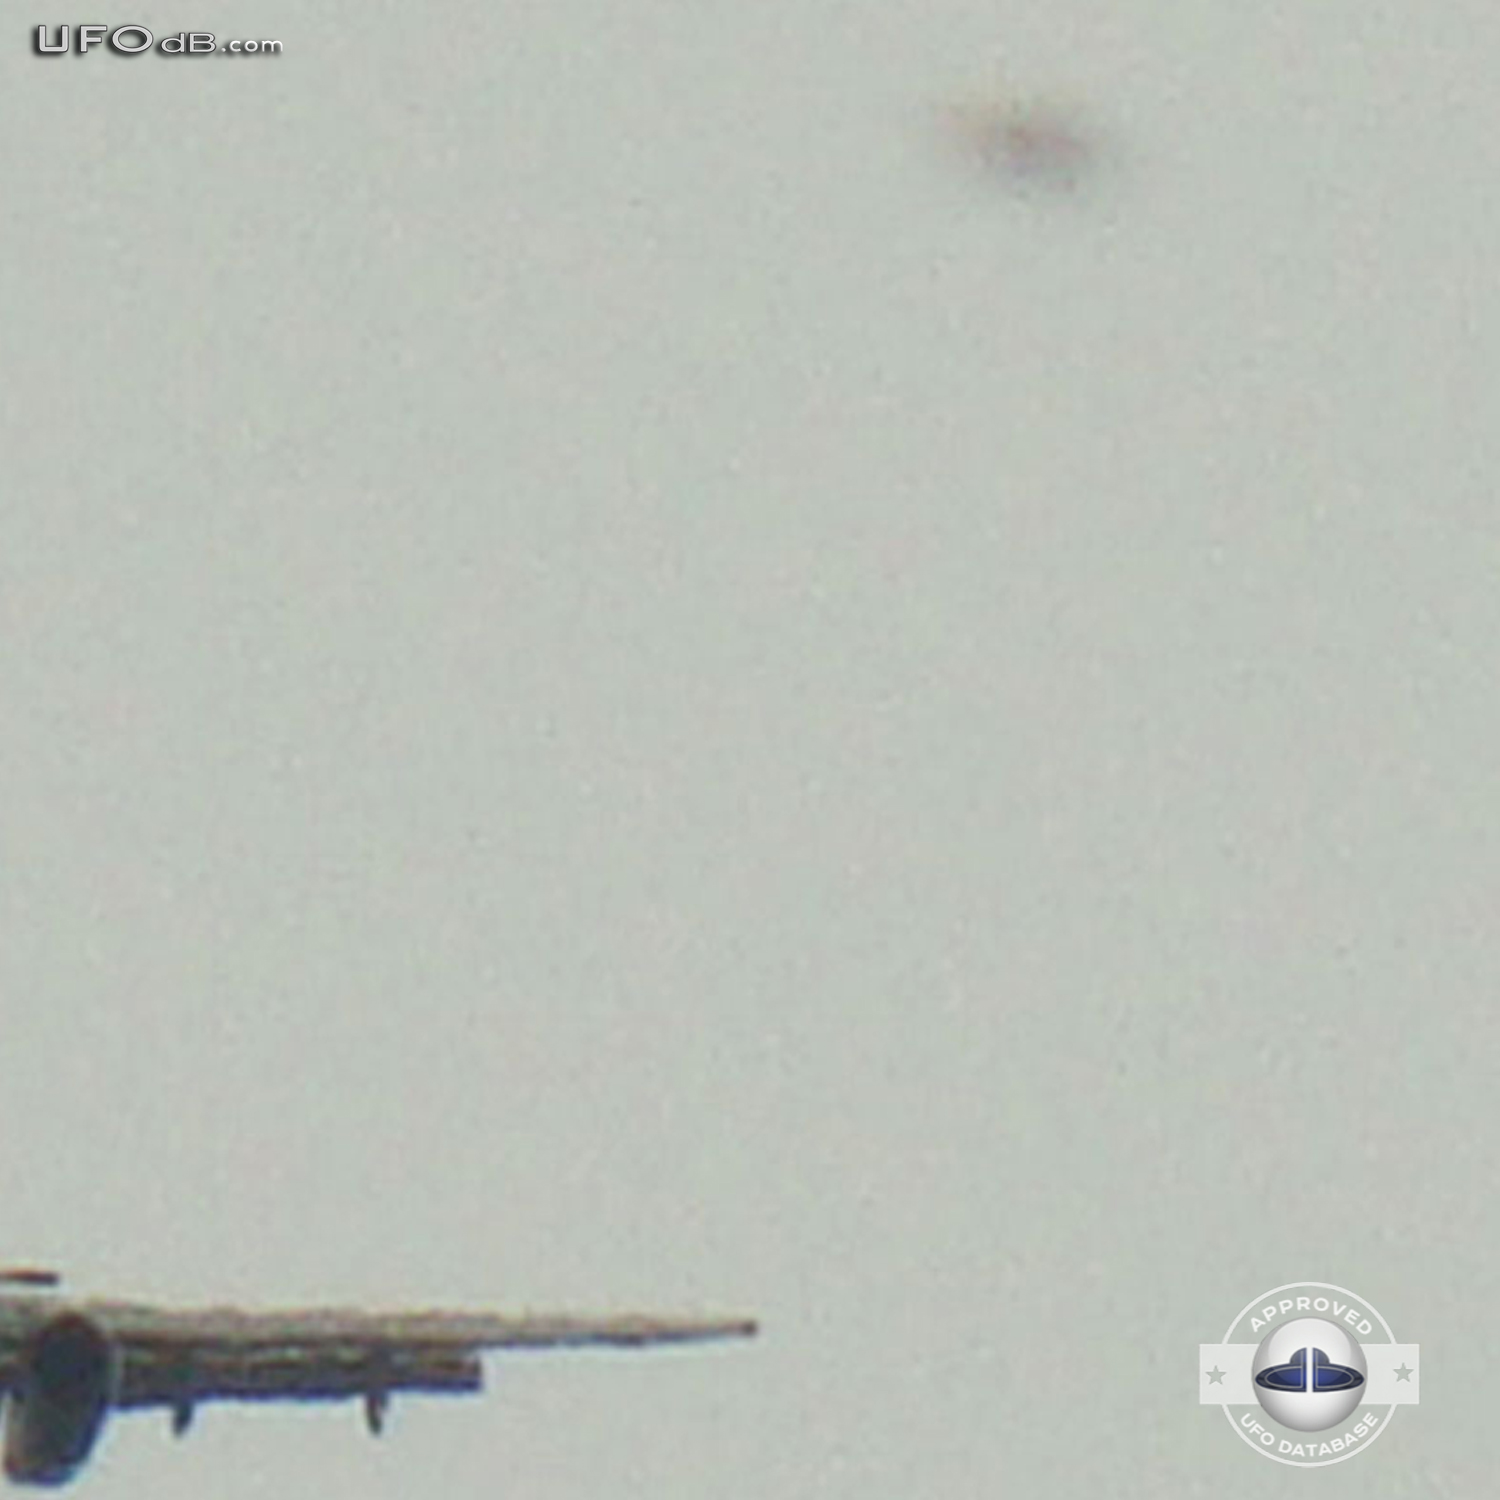 Witness near Maracaibo Airport takes a picture of a UFO near Airplane UFO Picture #351-3